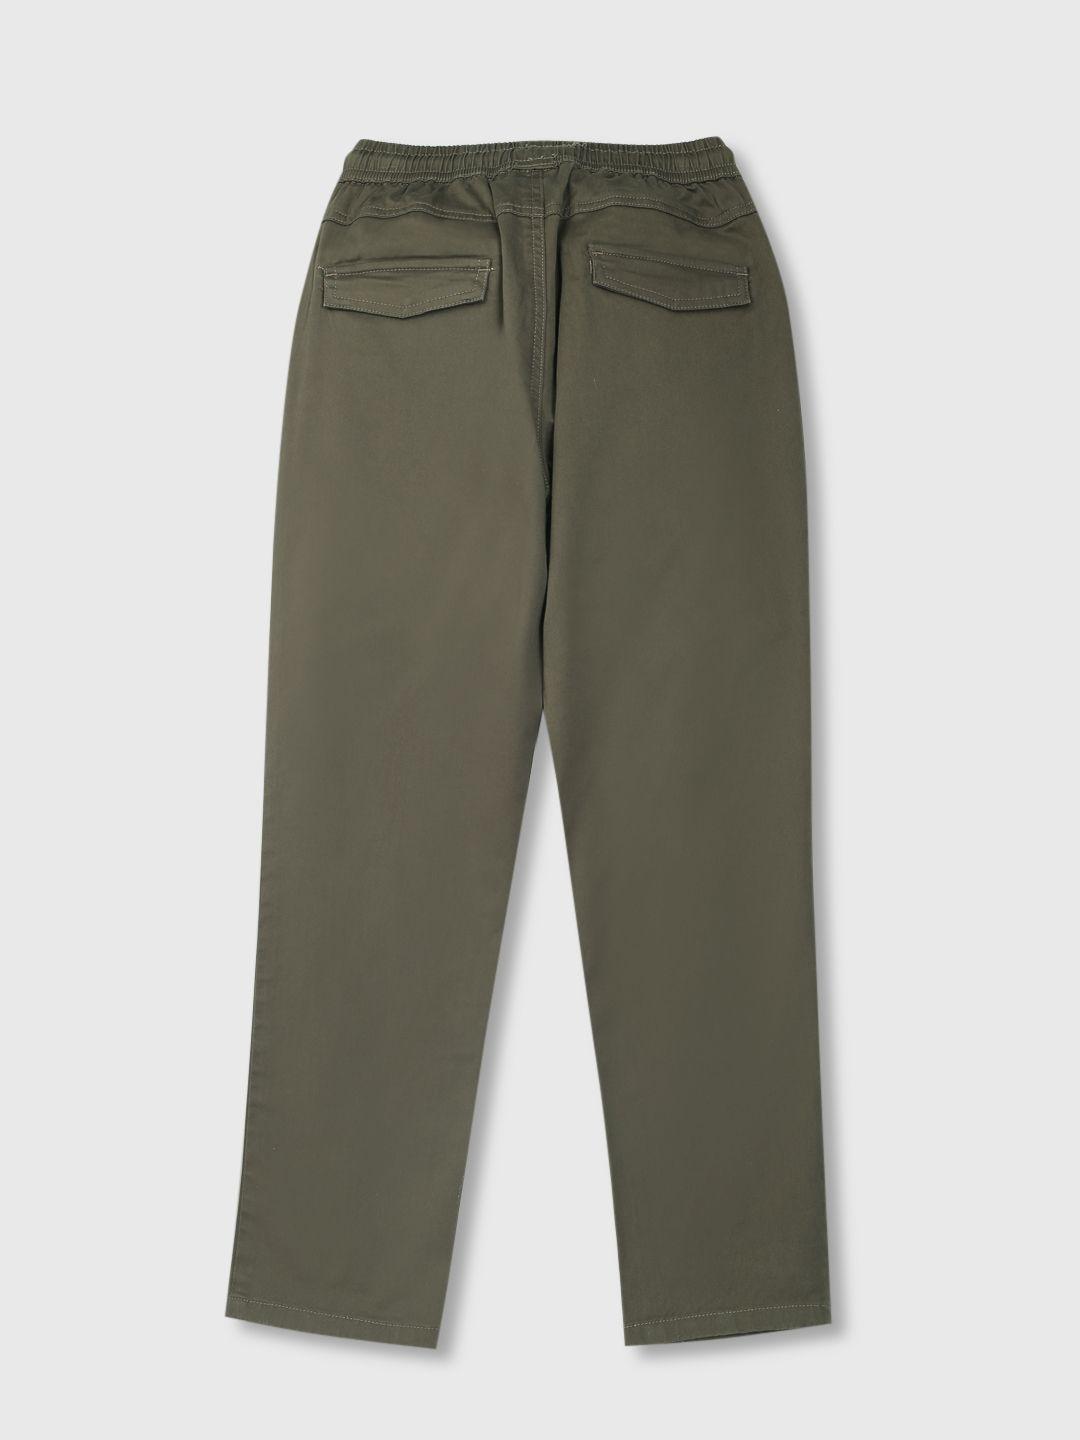 palm-tree-boys-olive-green-joggers-trousers